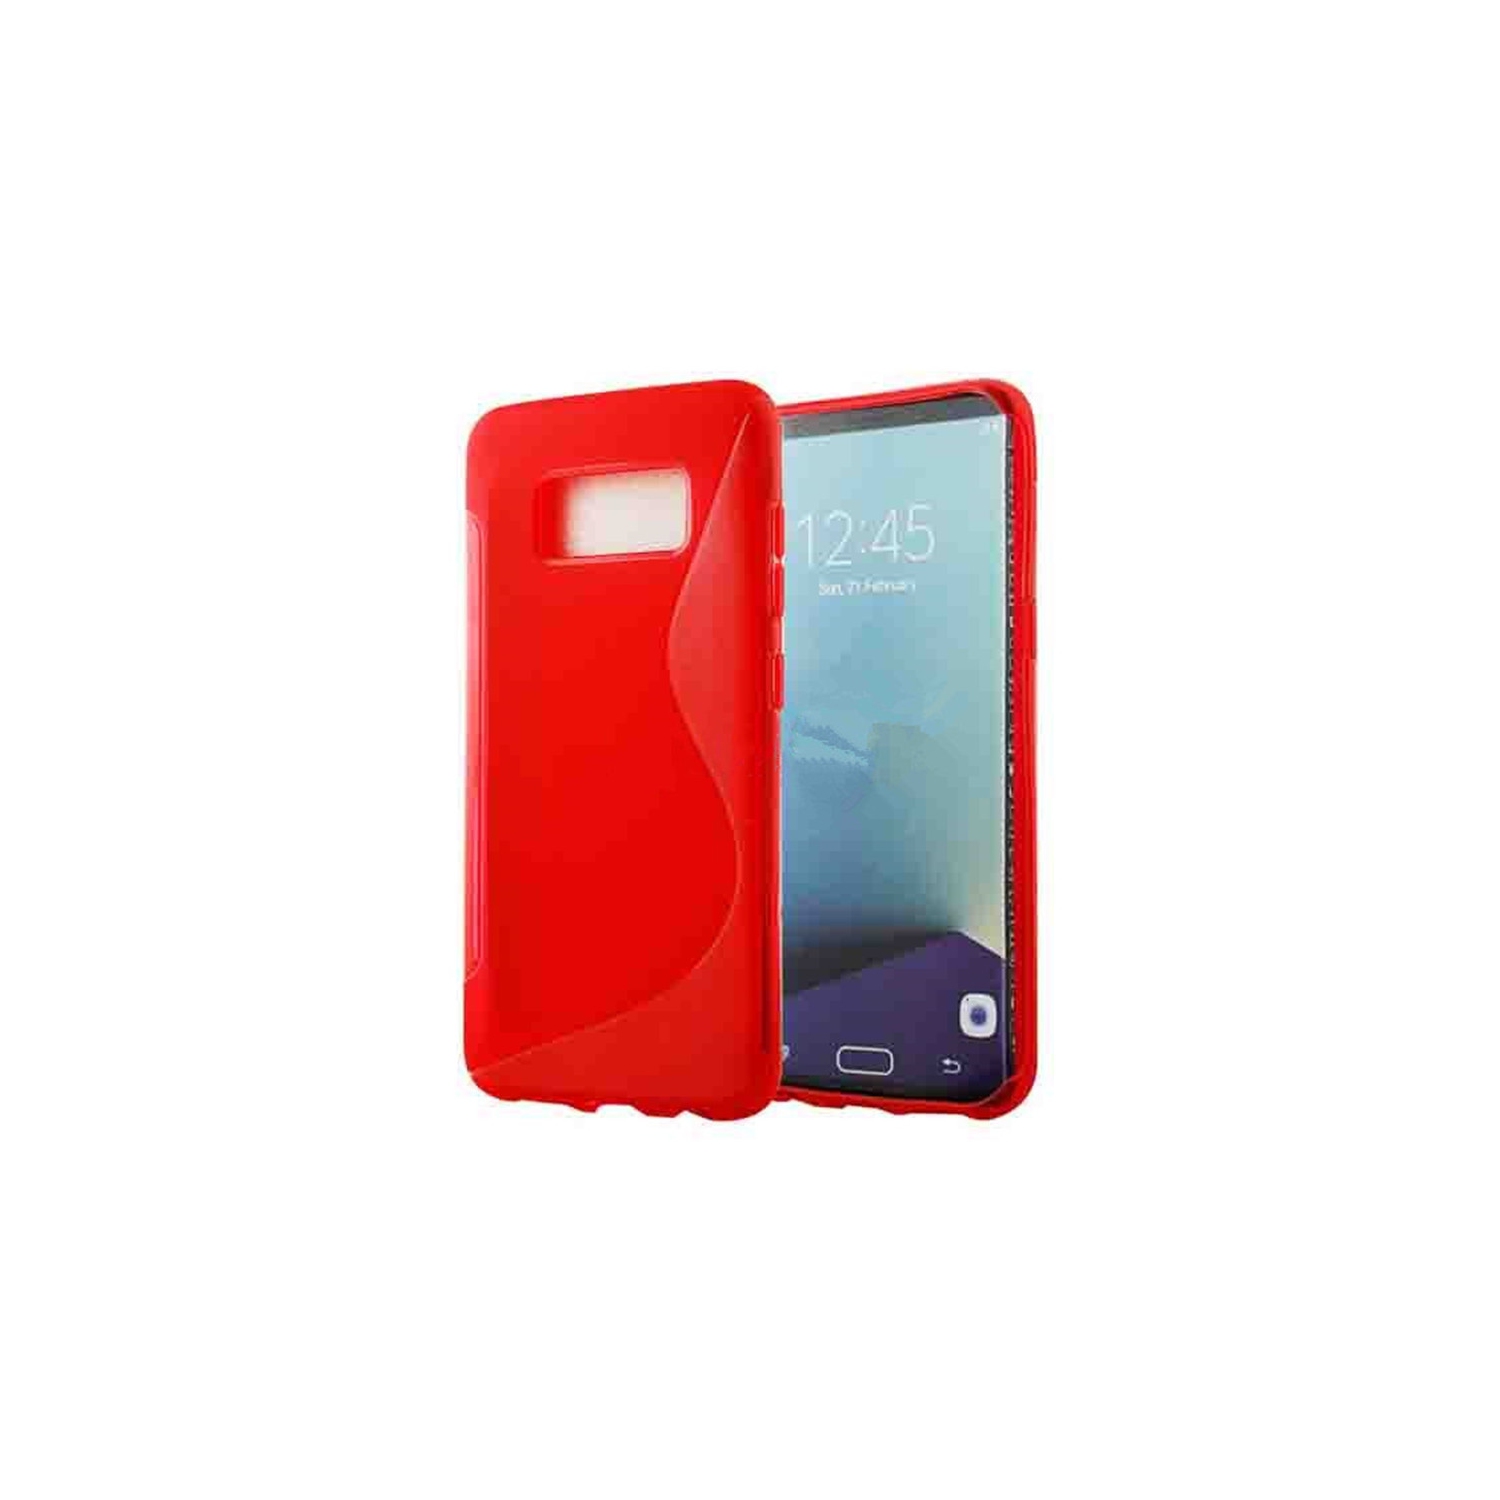 【CSmart】 Ultra Thin Soft TPU Silicone Jelly Bumper Back Cover Case for Samsung Galaxy S8 Plus, Red